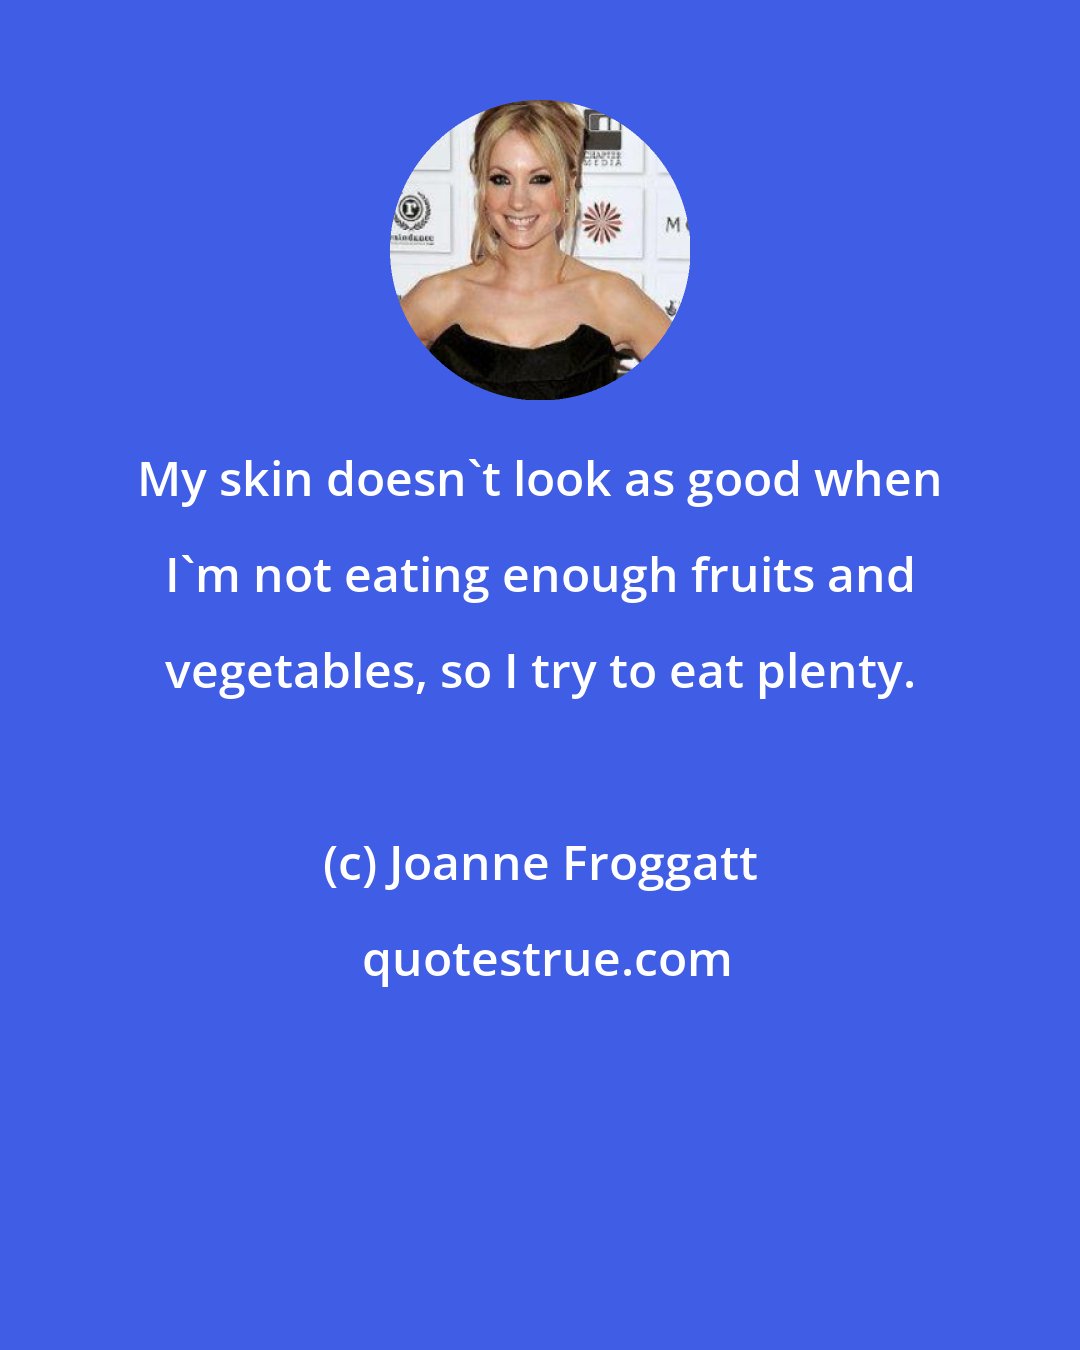 Joanne Froggatt: My skin doesn't look as good when I'm not eating enough fruits and vegetables, so I try to eat plenty.